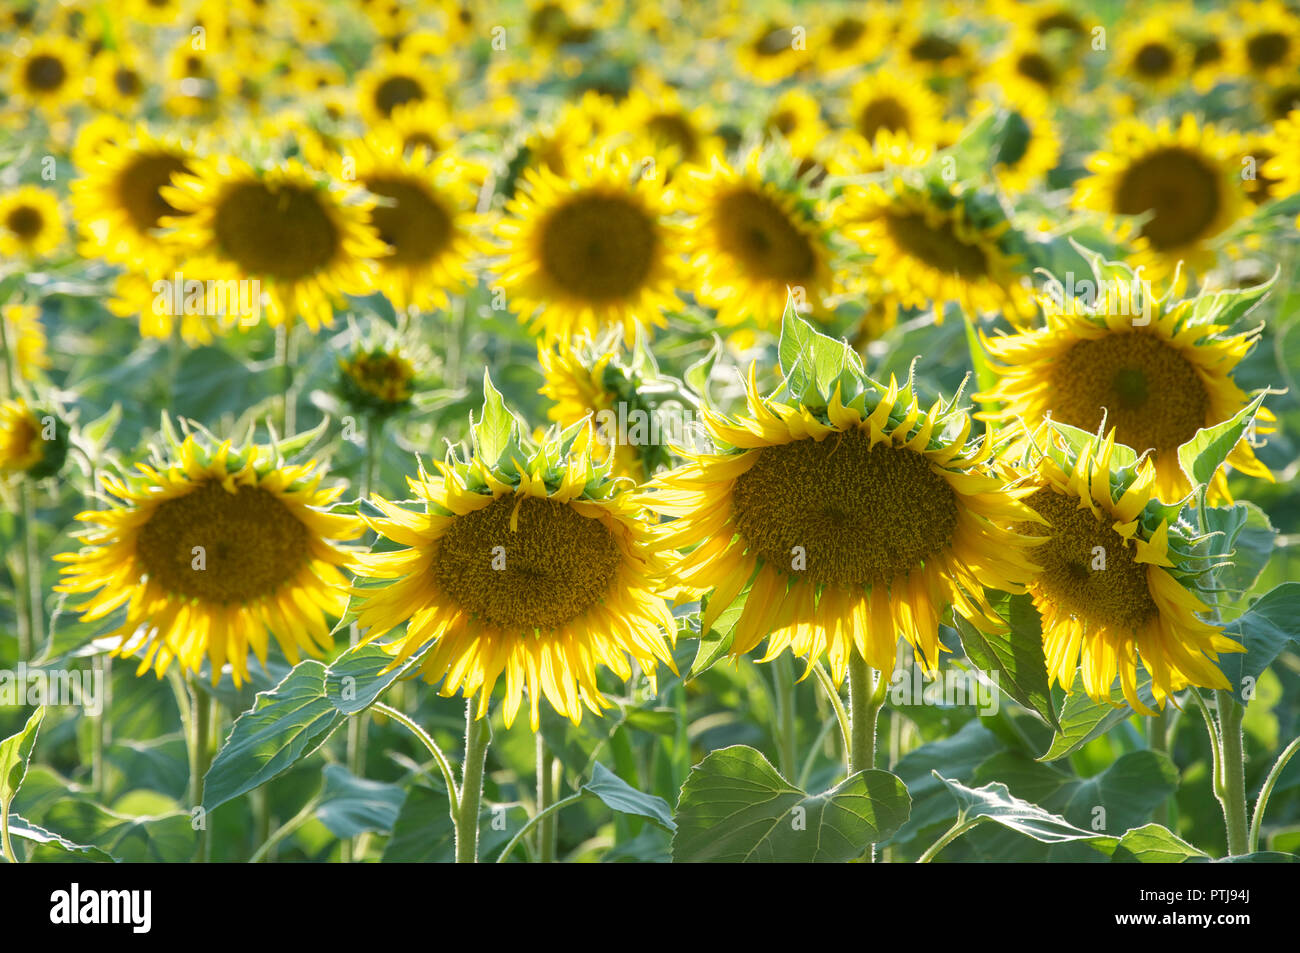 Summertime in the French countryside. A field of bright yellow Sunflowers, Helianthus Anuus, growing in the Vercors region of La Drôme. Rural France. Stock Photo